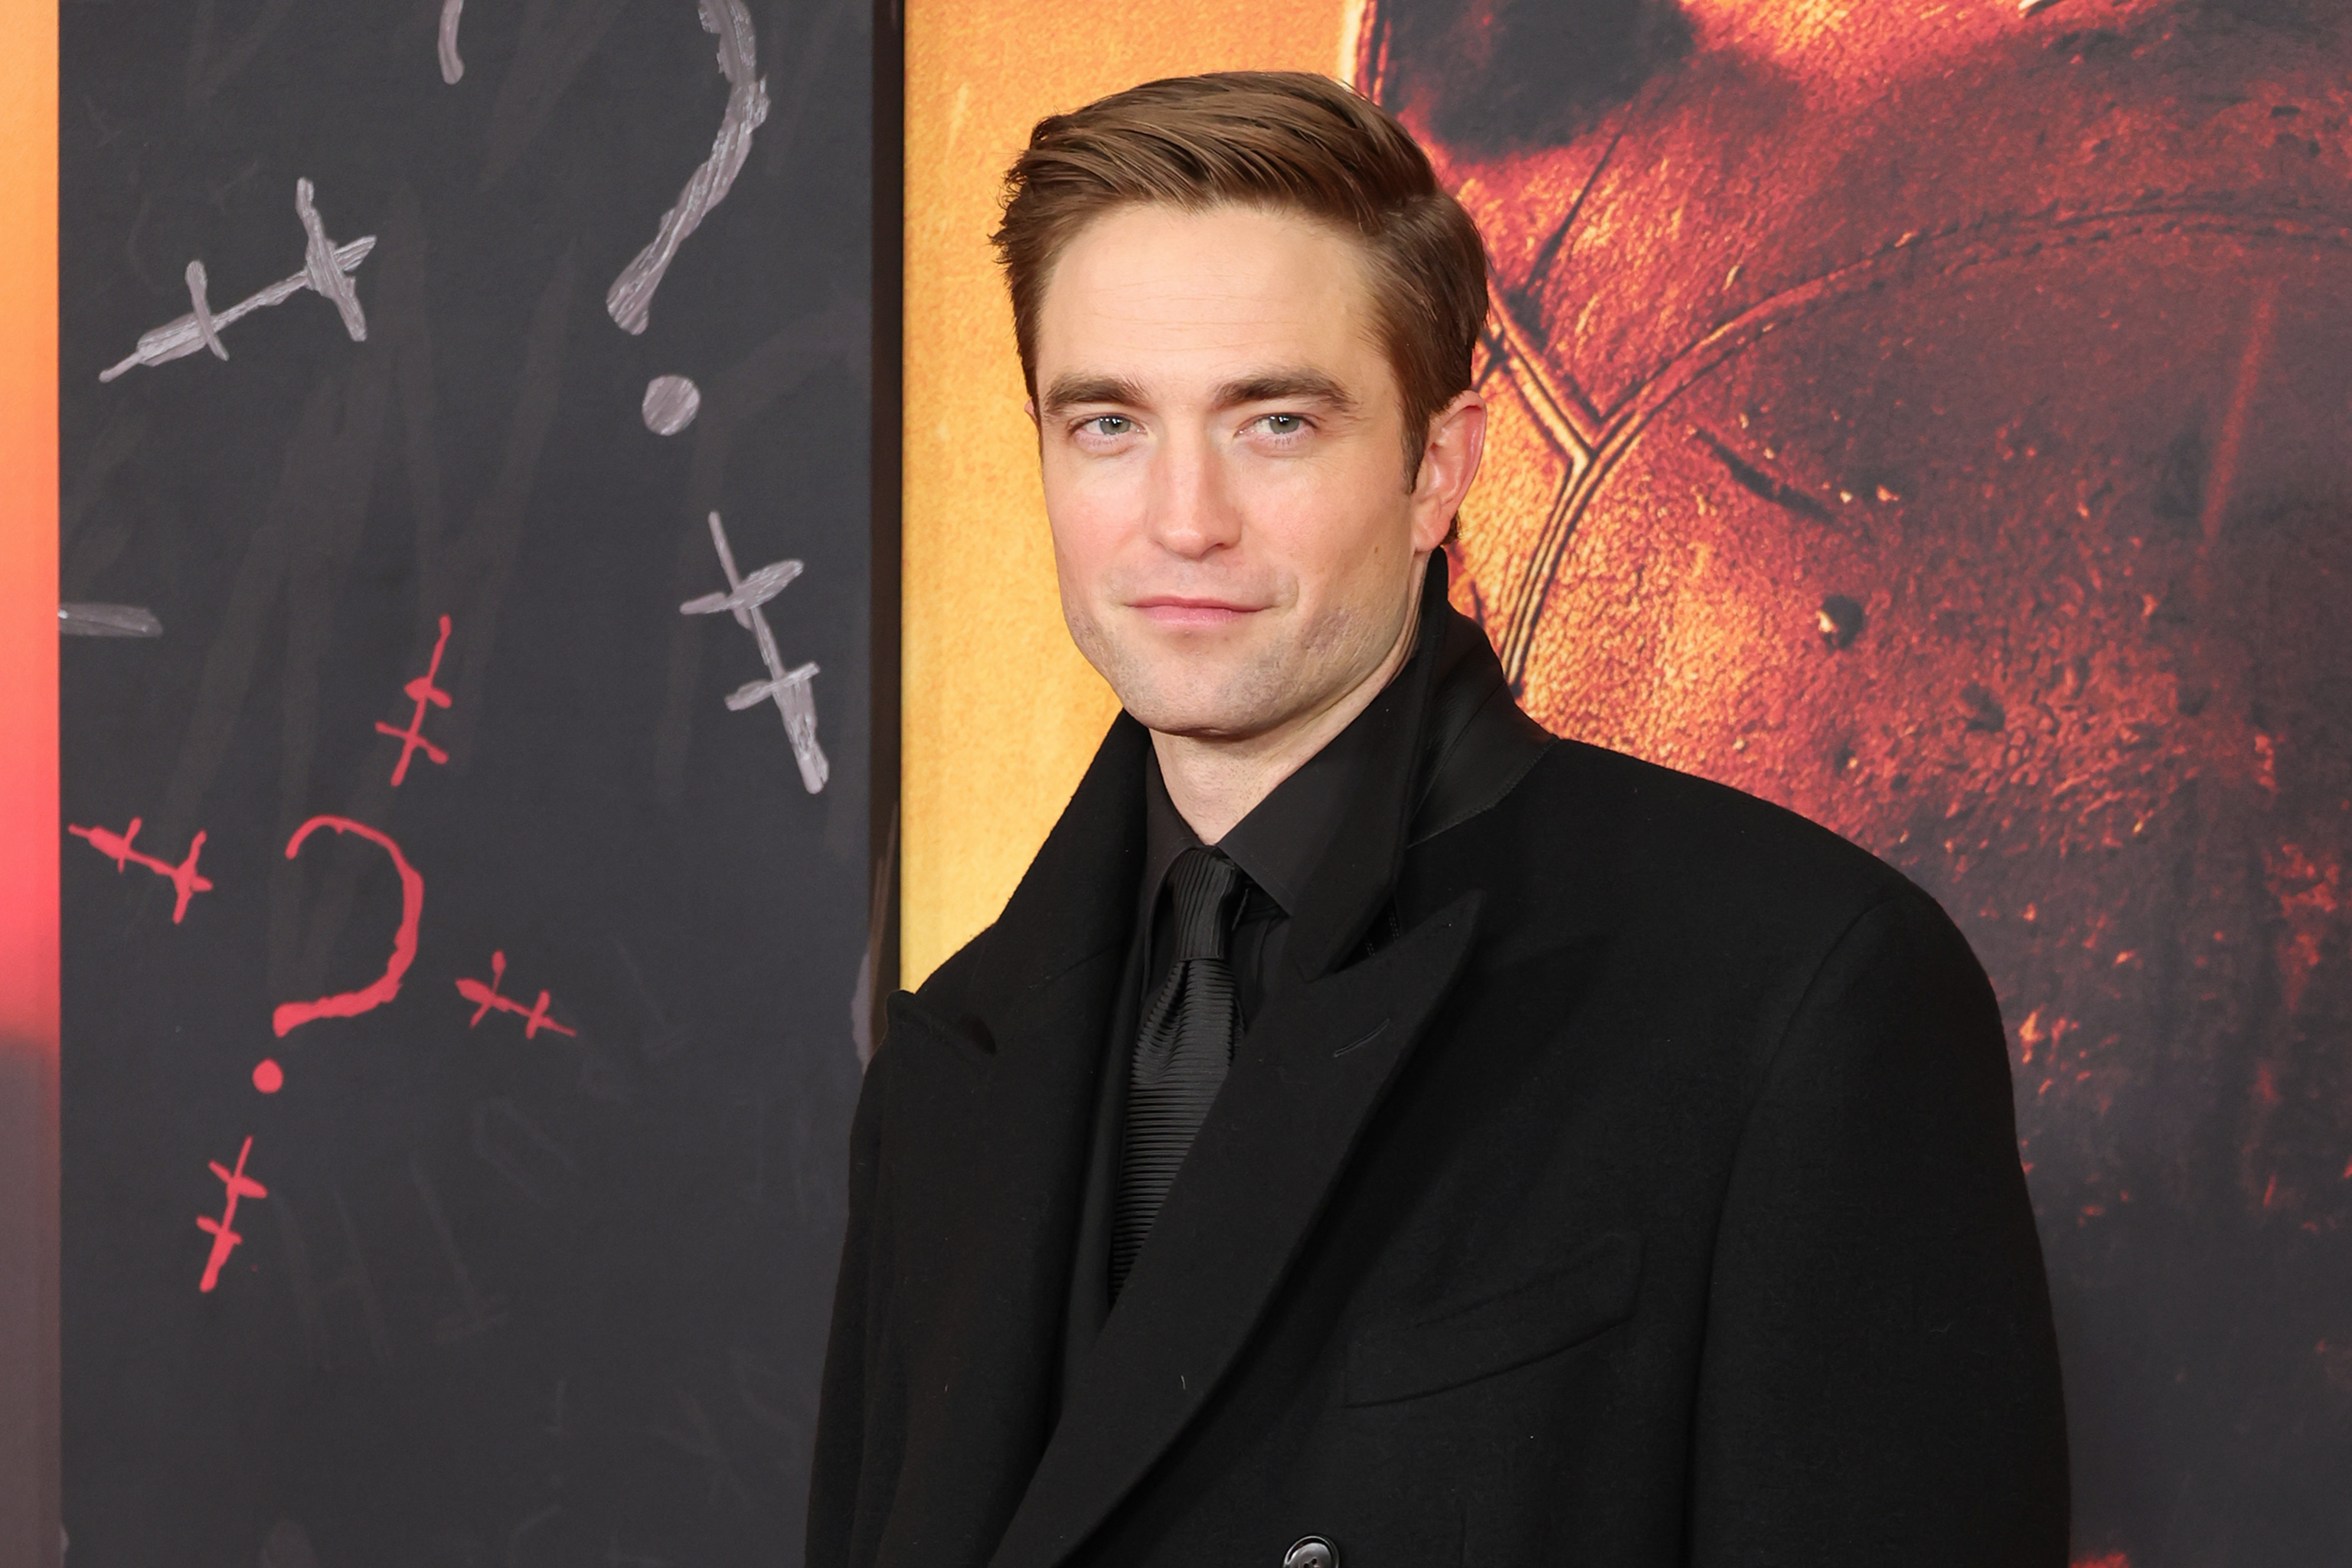 'The Batman' star Robert Pattinson, who might appear in a sequel, wears a large black coat over a black button-up shirt and black tie.